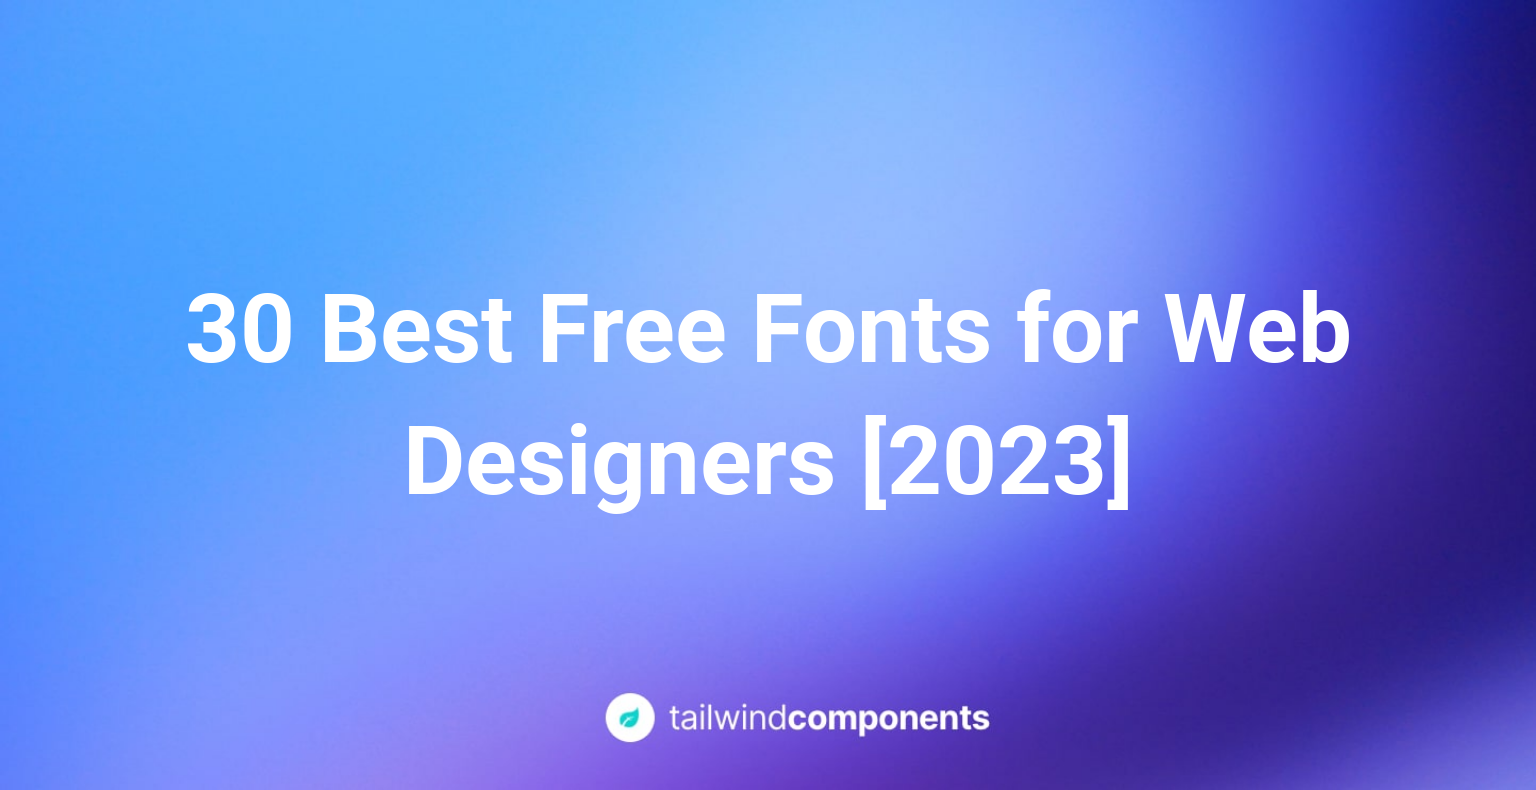 30 Best Free Fonts for Web Designers Image